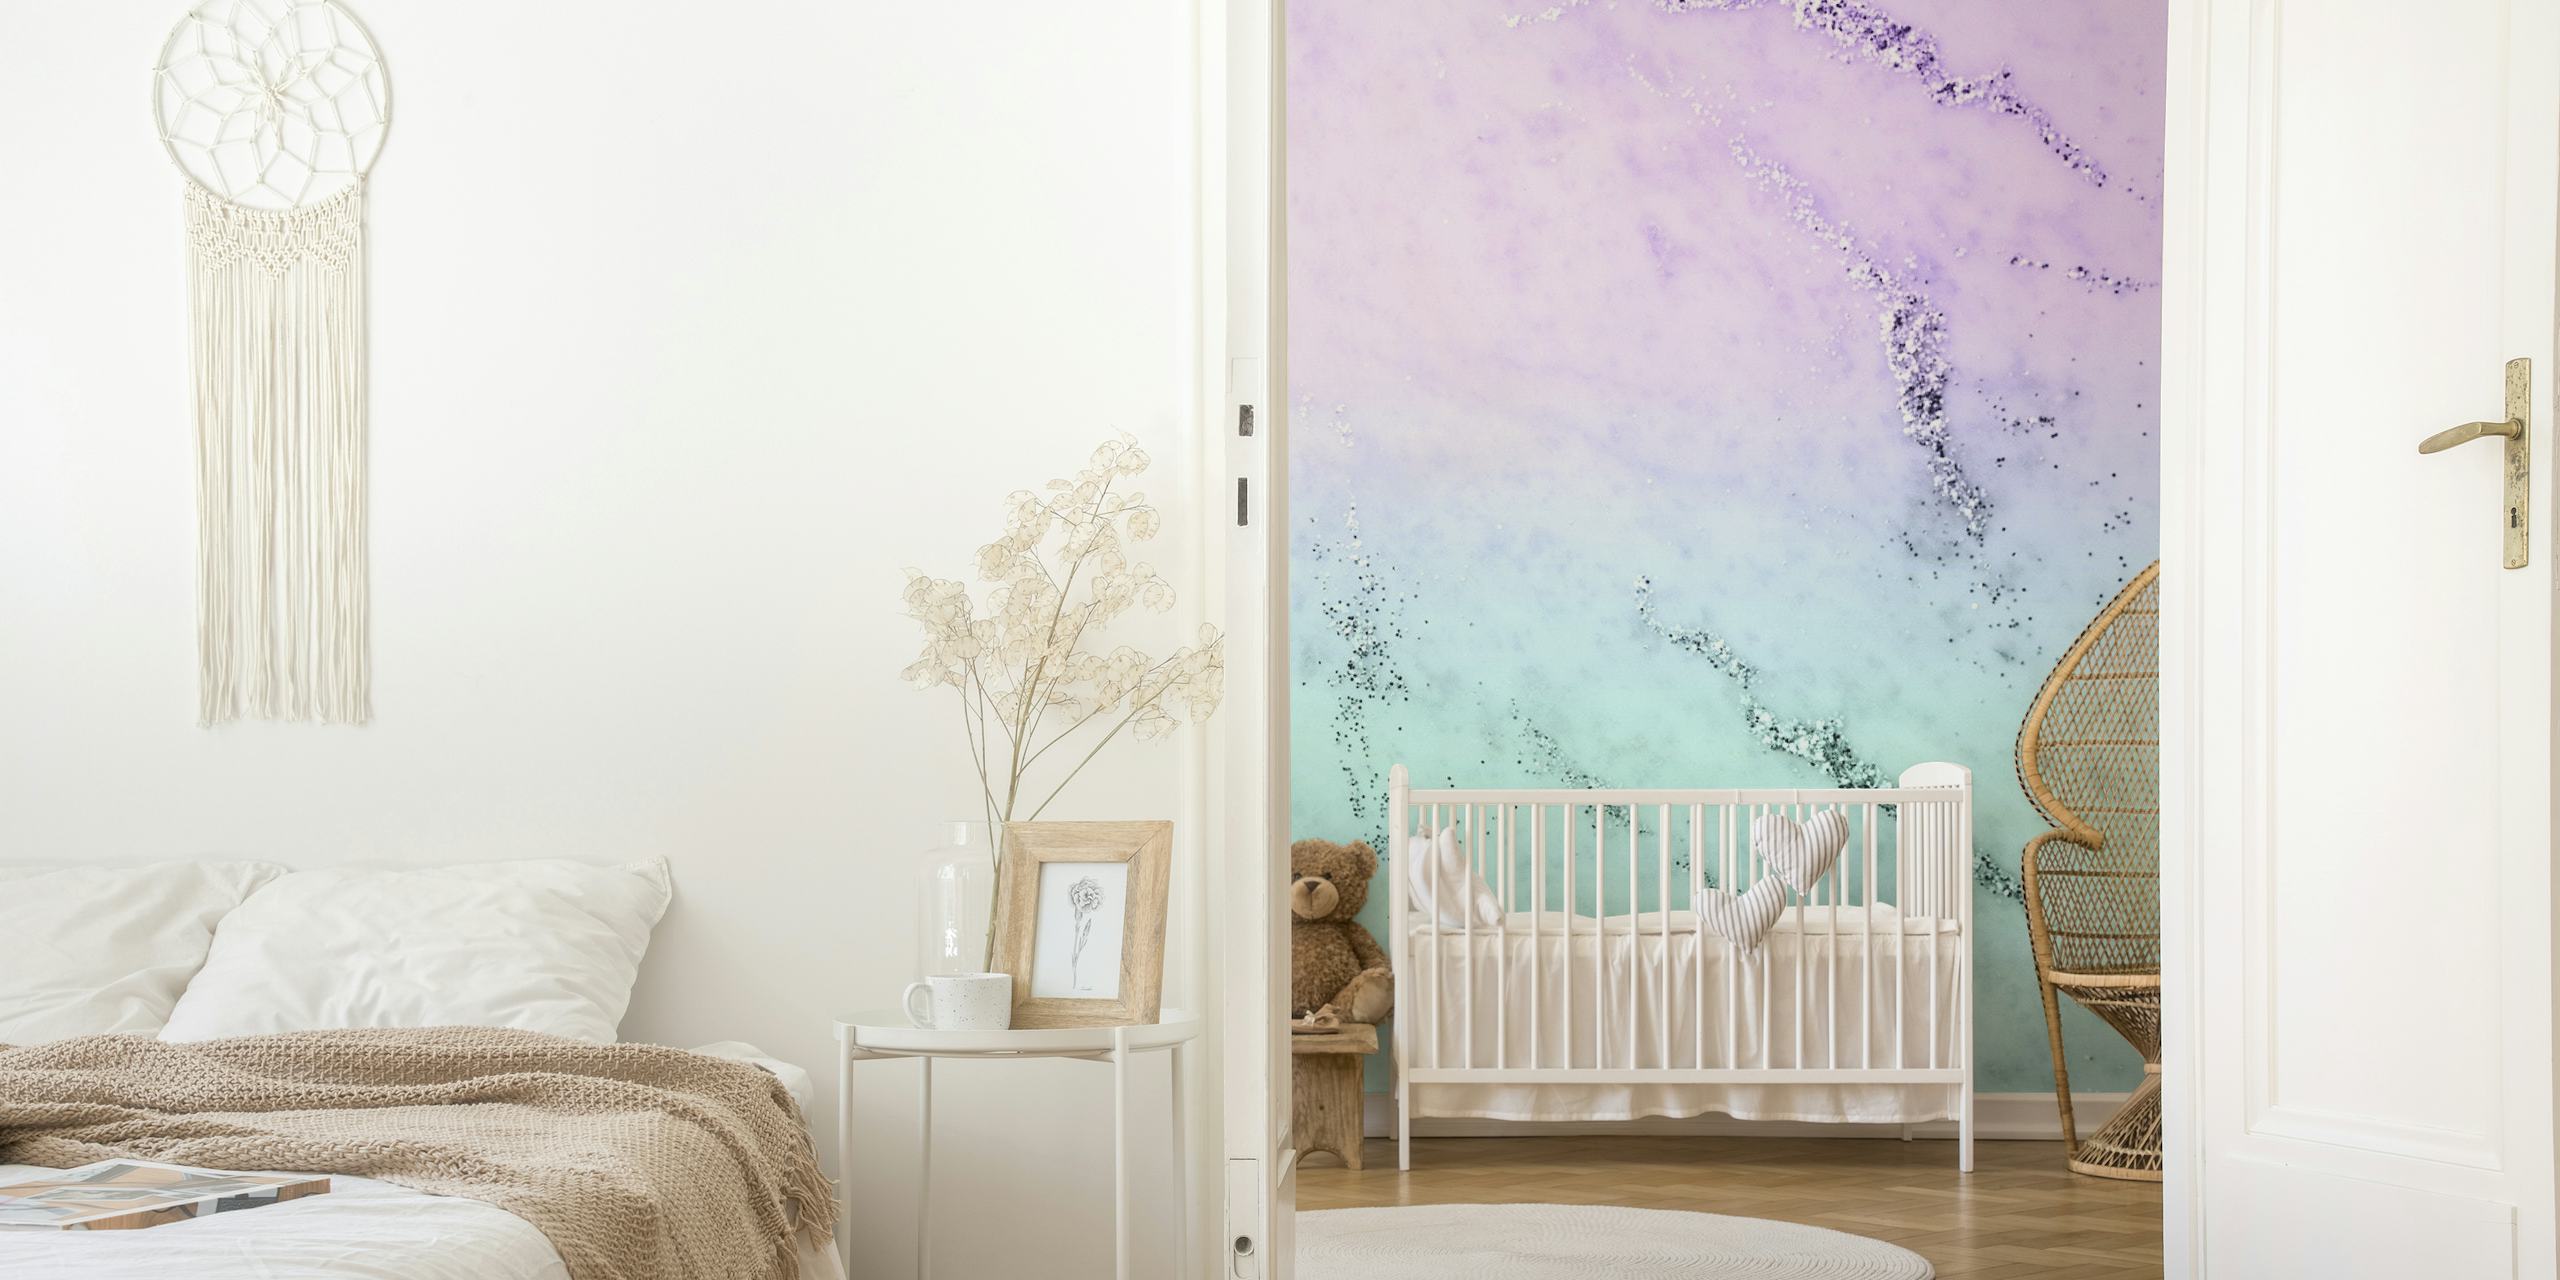 Abstract mermaid-inspired glitter marble wall mural with pastel purple and tranquil teal colors.